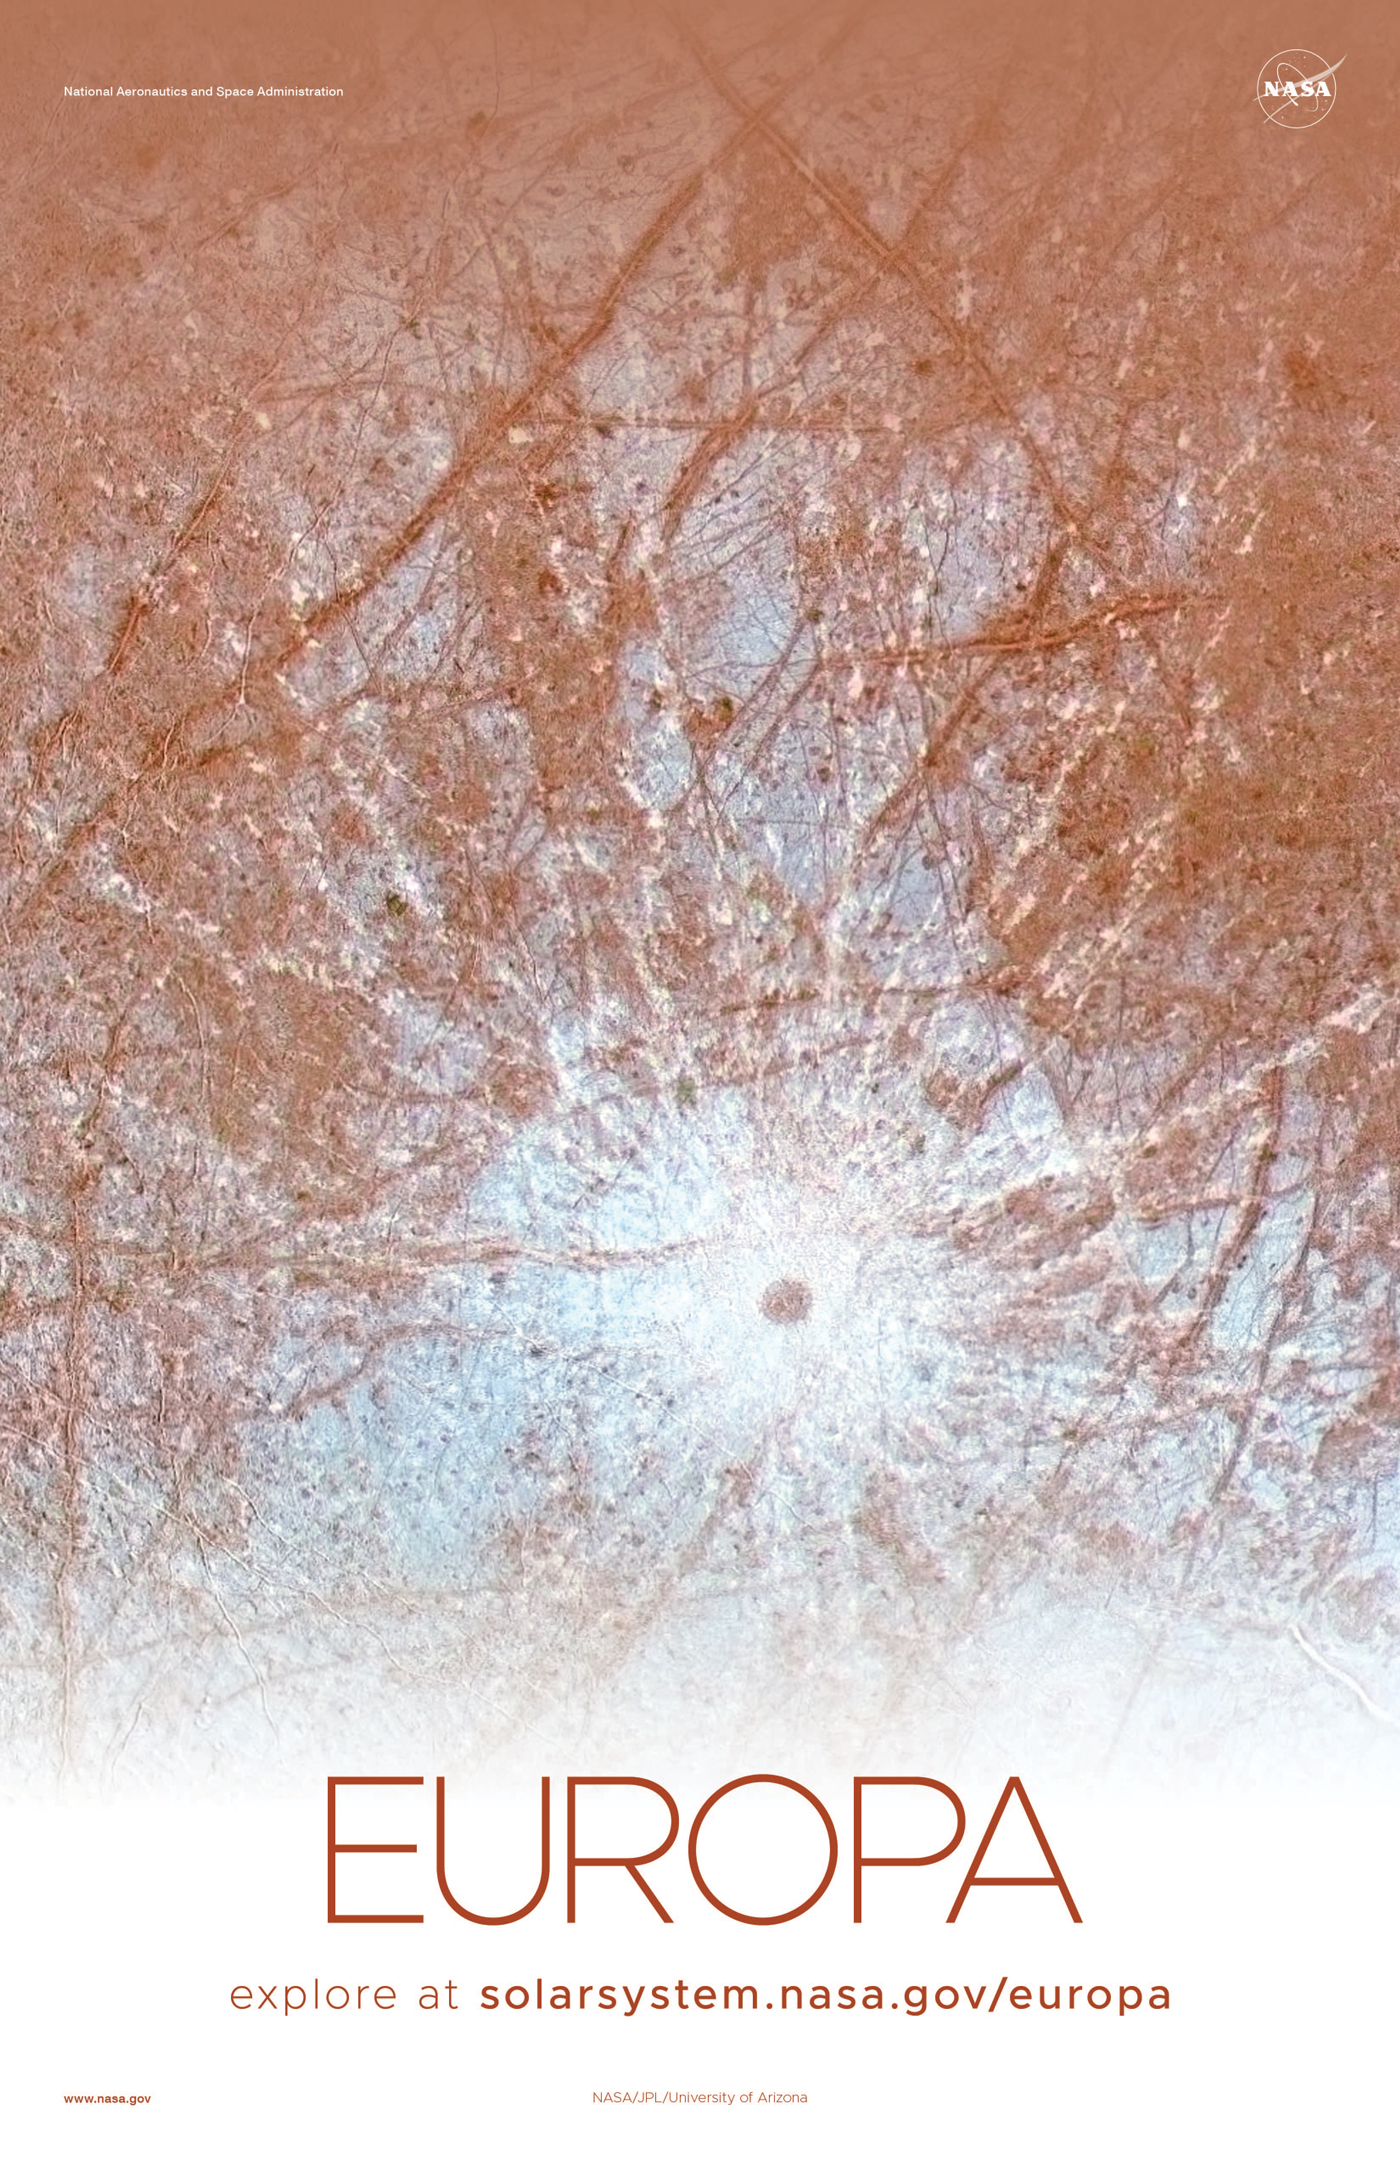 Poster showing the surface of Europa.